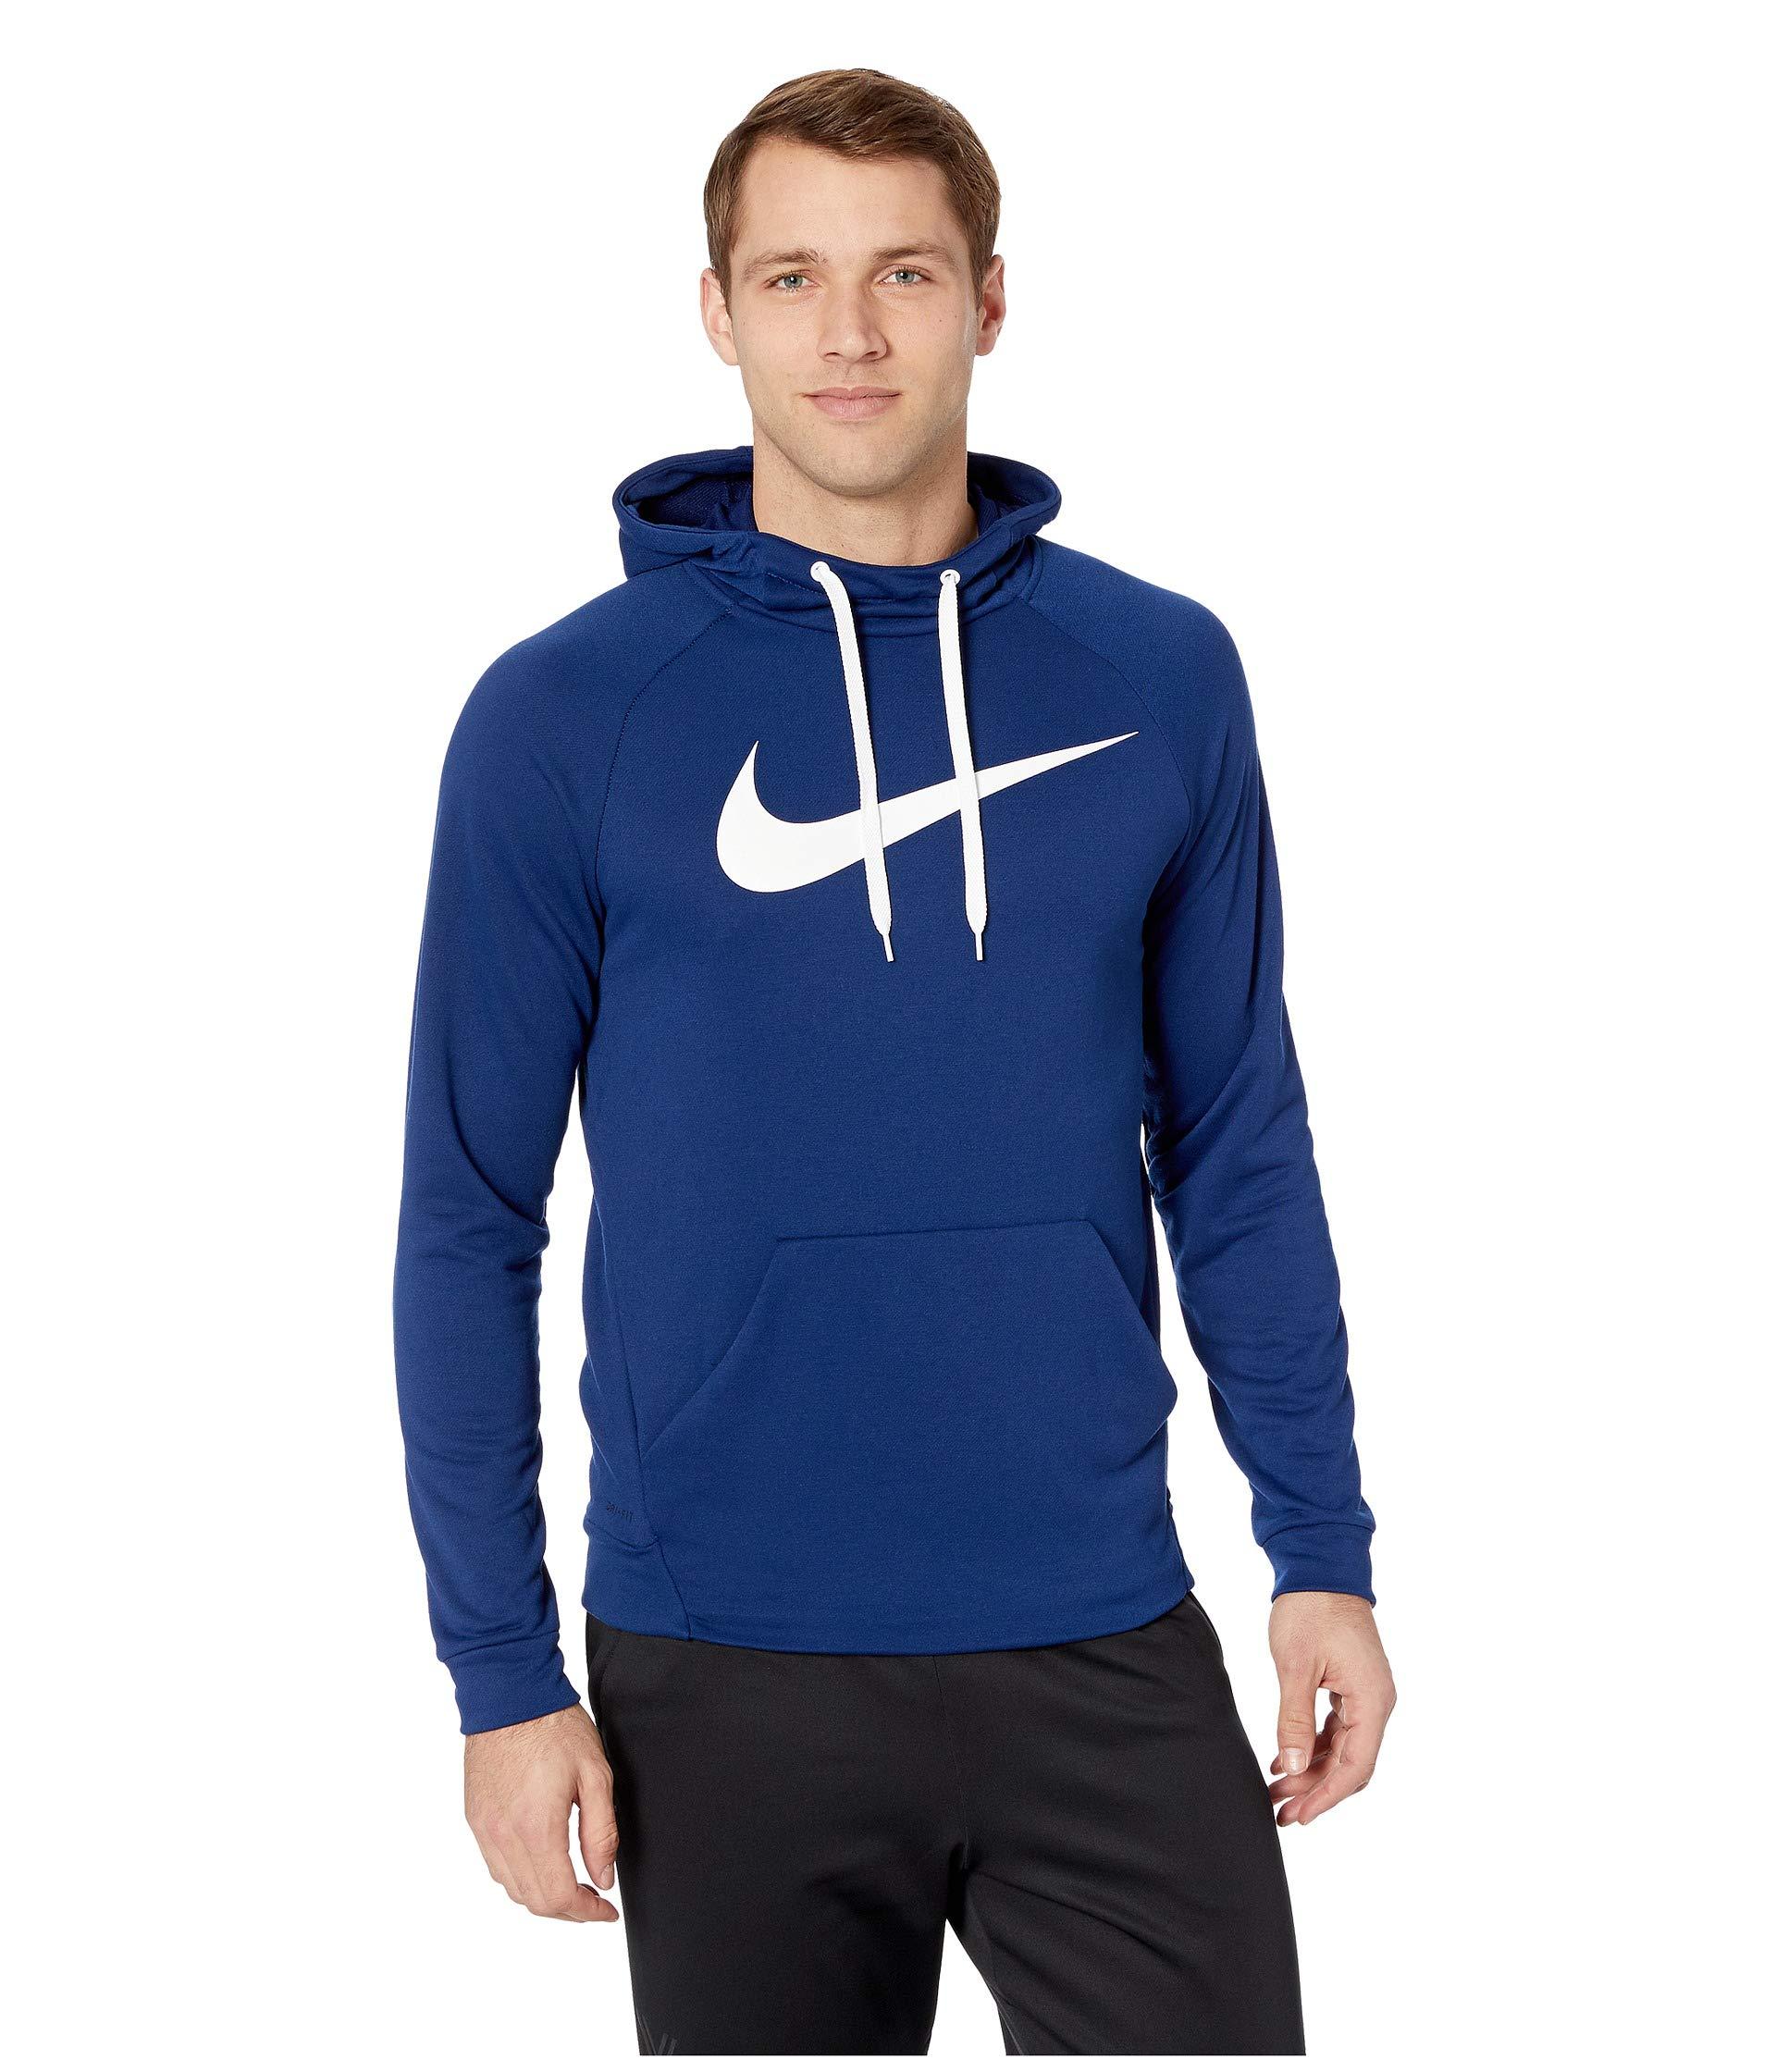 Nike Synthetic Swoosh Pullover Dry Training Hoodie in Blue for Men - Lyst